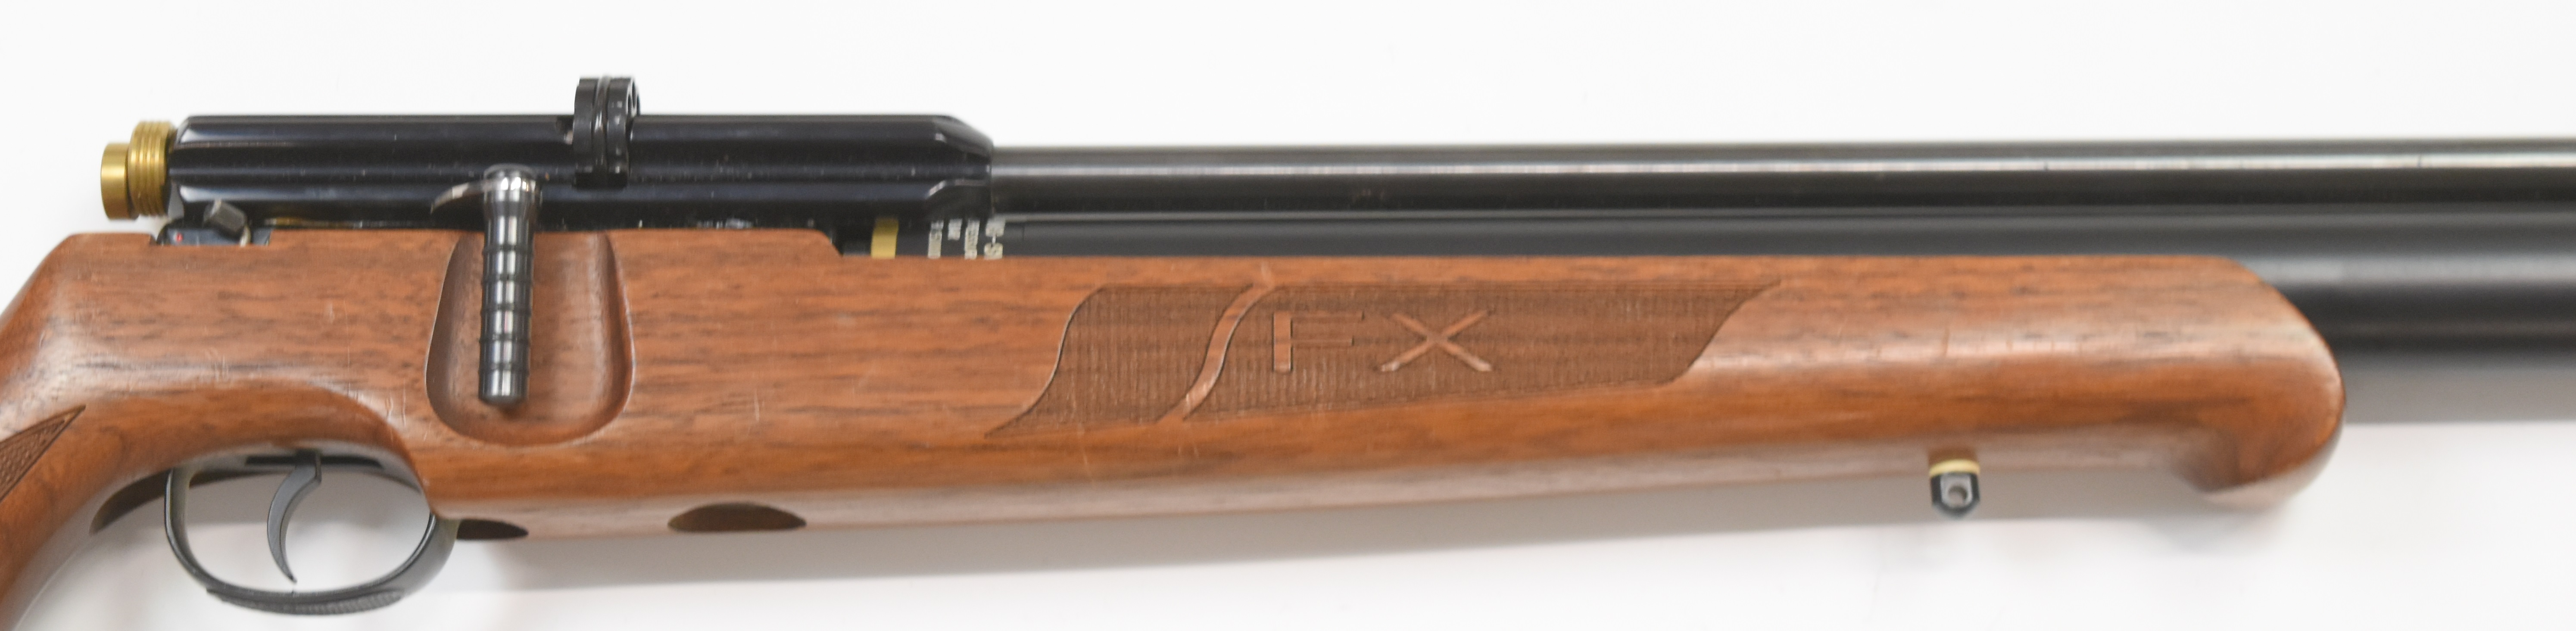 FX Cyclone .22 FAC PCP air rifle with textured semi-pistol grip and forend, raised cheek piece, - Image 4 of 10